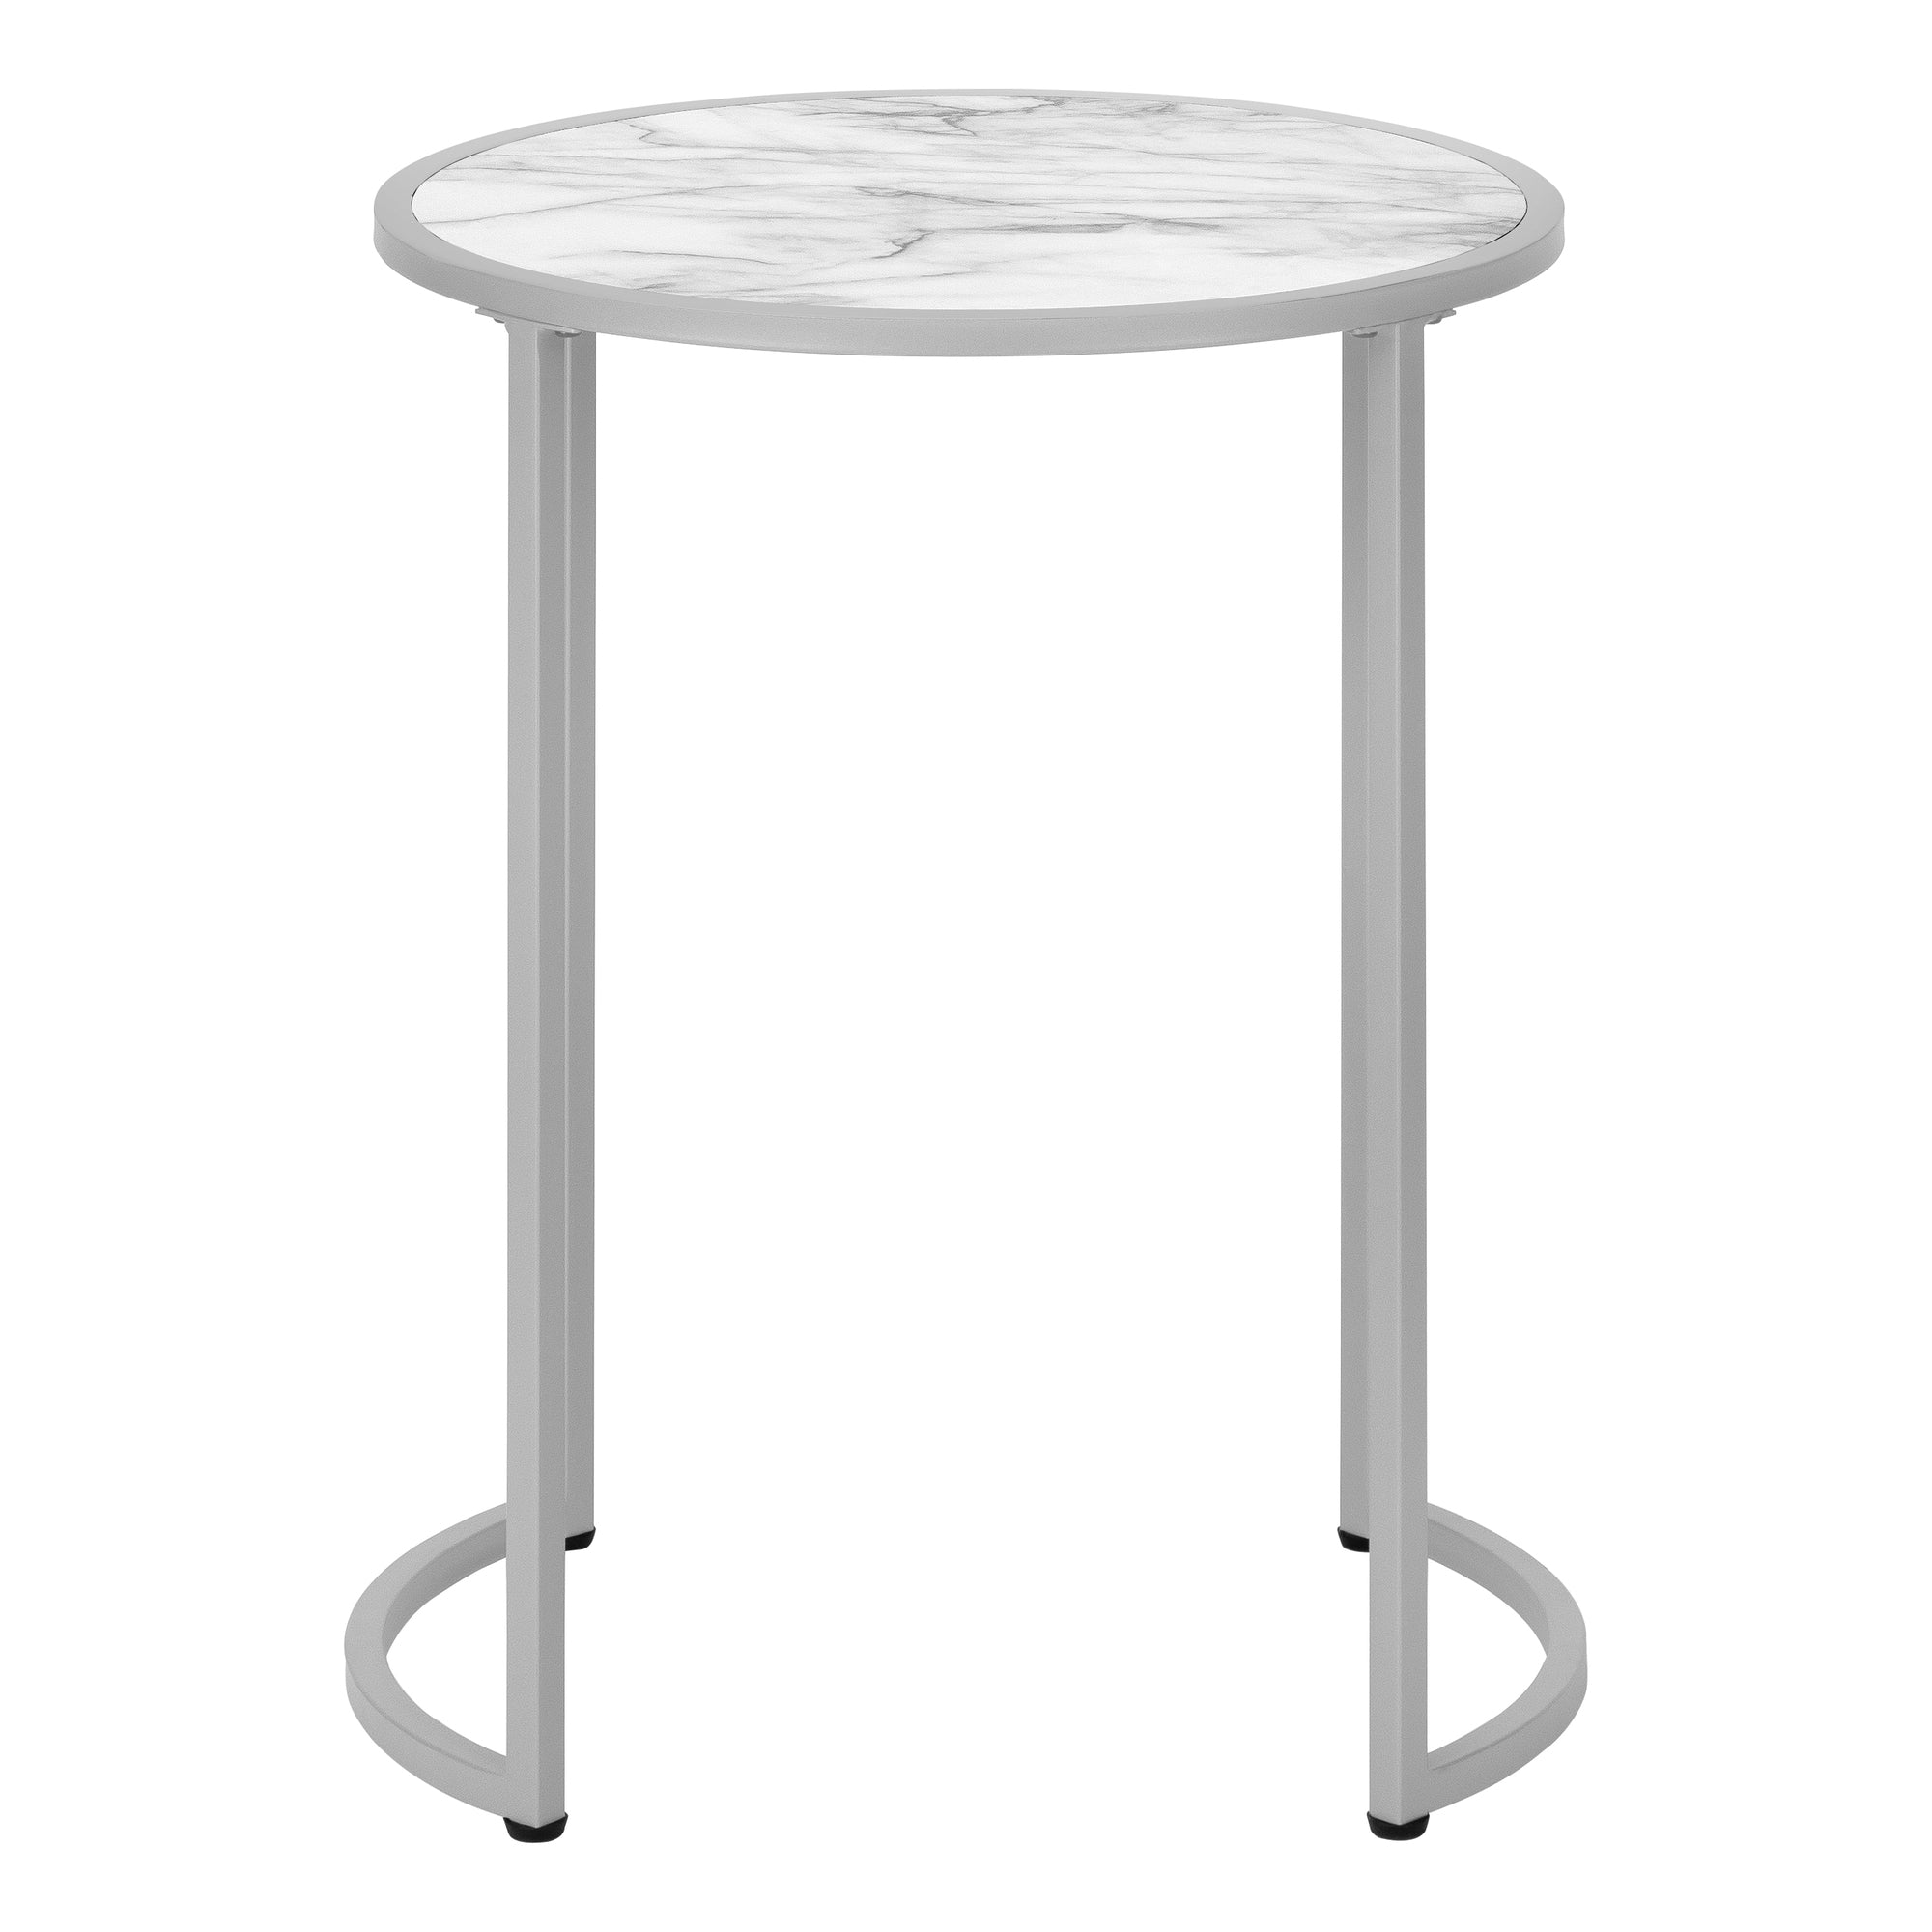 Accent Table - 24H / White Marble-Look / Silver Metal